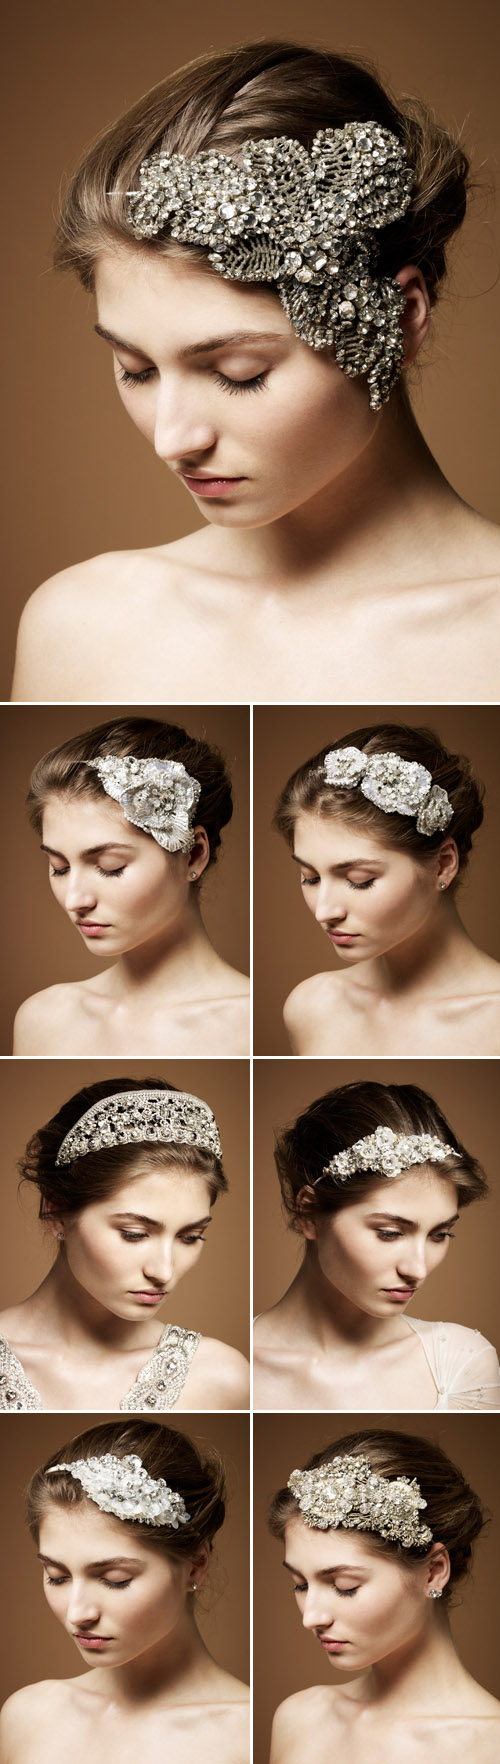 Jenny-Packham-spring-summer-2012-bridal-accessories-collection-wedding-hair-pieces-2.jpg